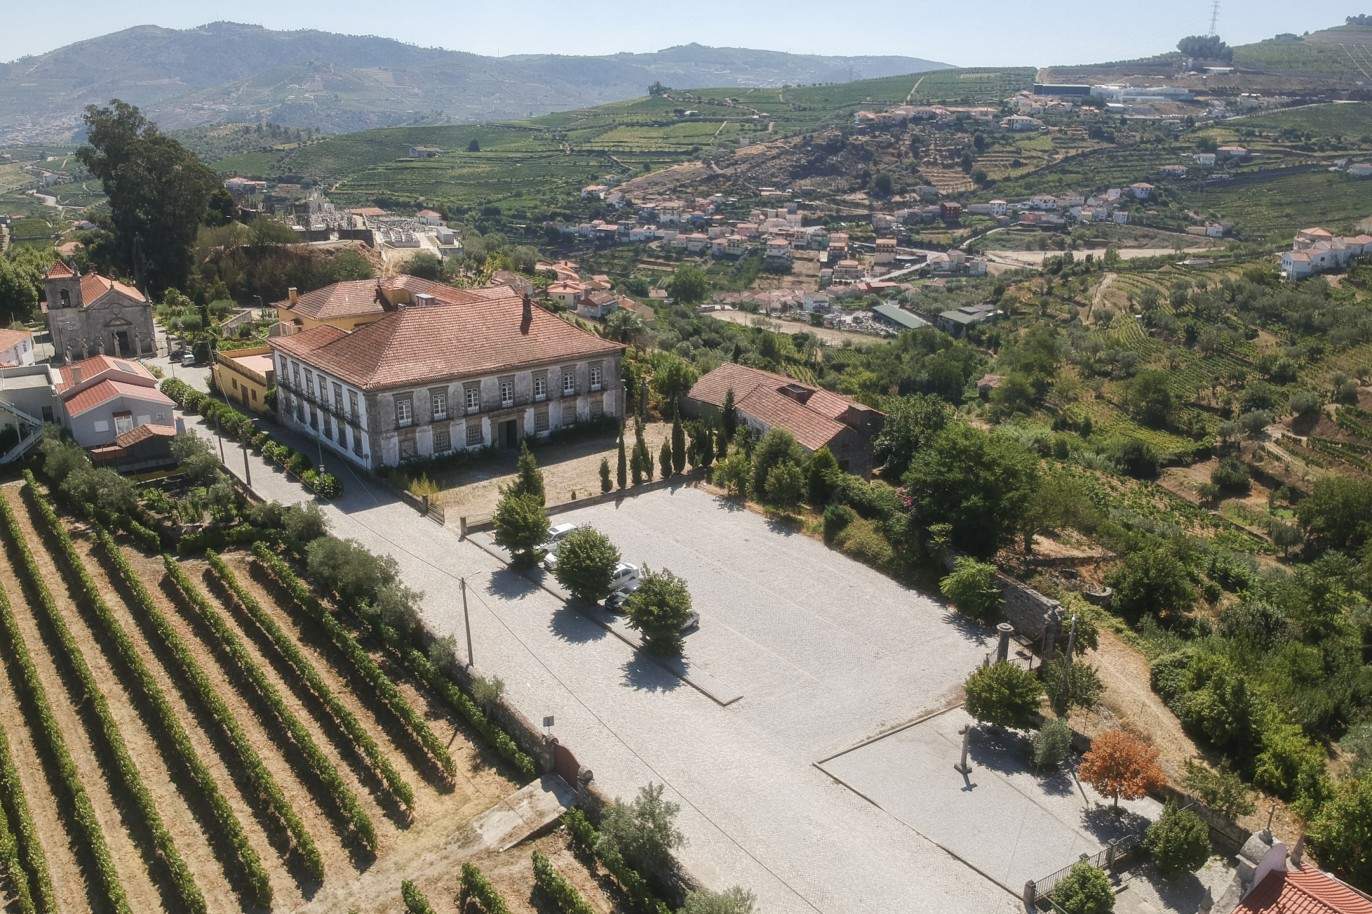 Selling: Manor House to restore with gardens and centennial fountain, in Lamego, Douro Valley, North of Portugal_207356